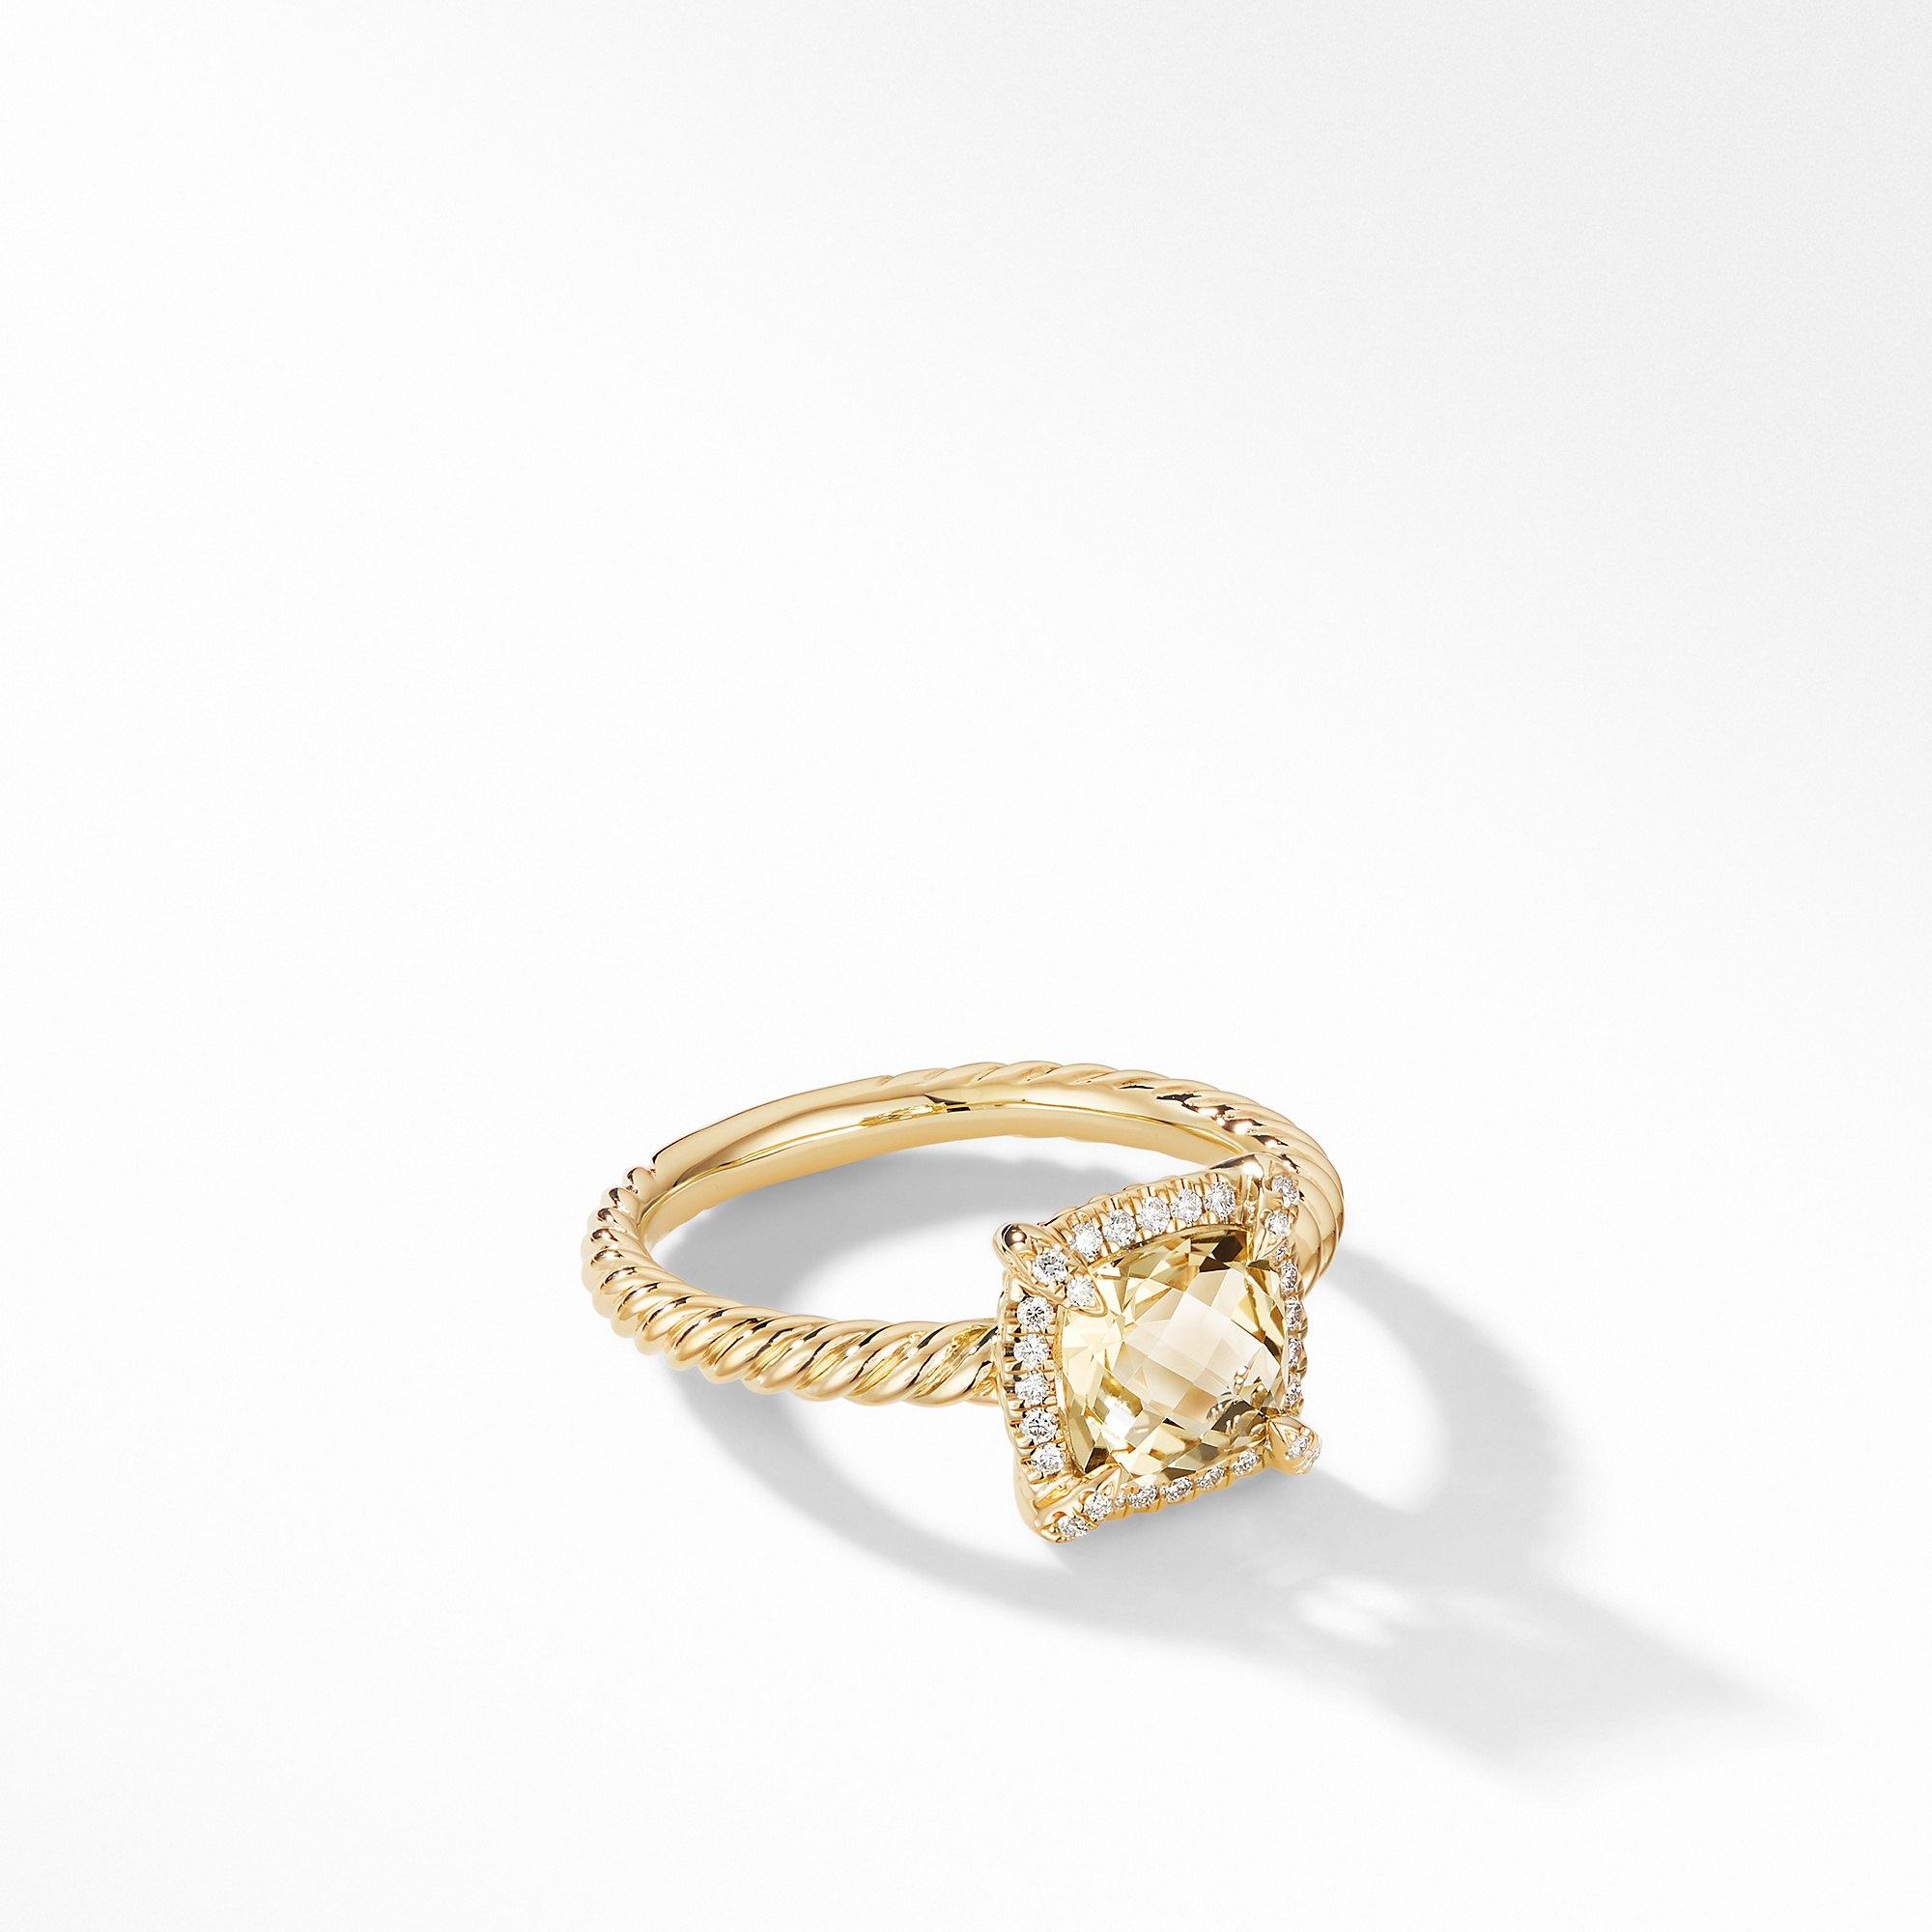 David Yurman Chatelaine Pave Bezel Ring in 18k Yellow Gold with Champagne Citrine, size 6.5